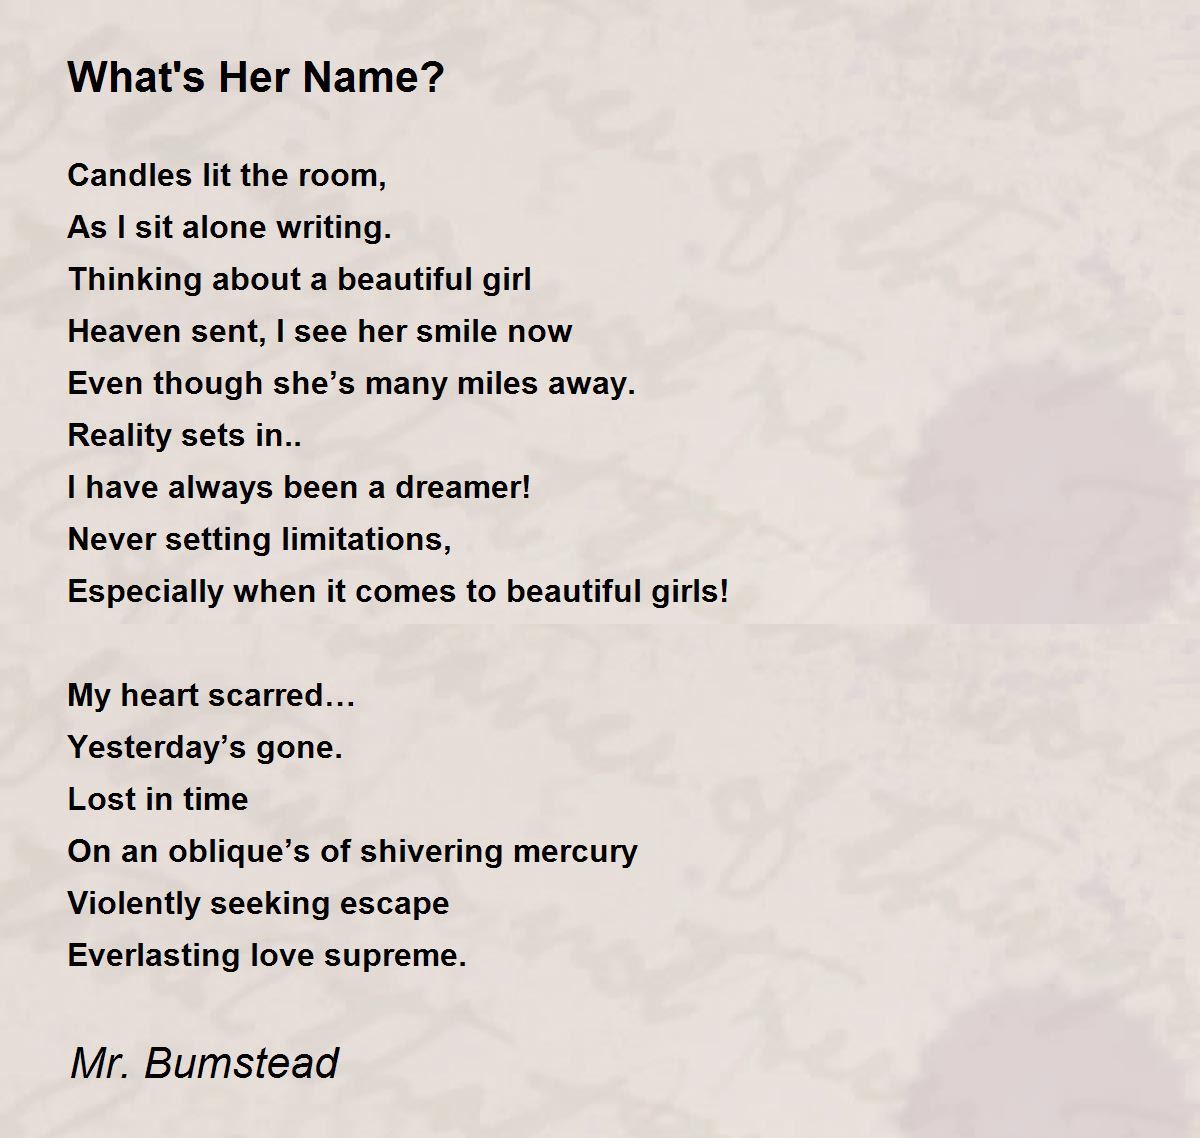 What's Her Name? - What's Her Name? Poem by Mr. Bumstead